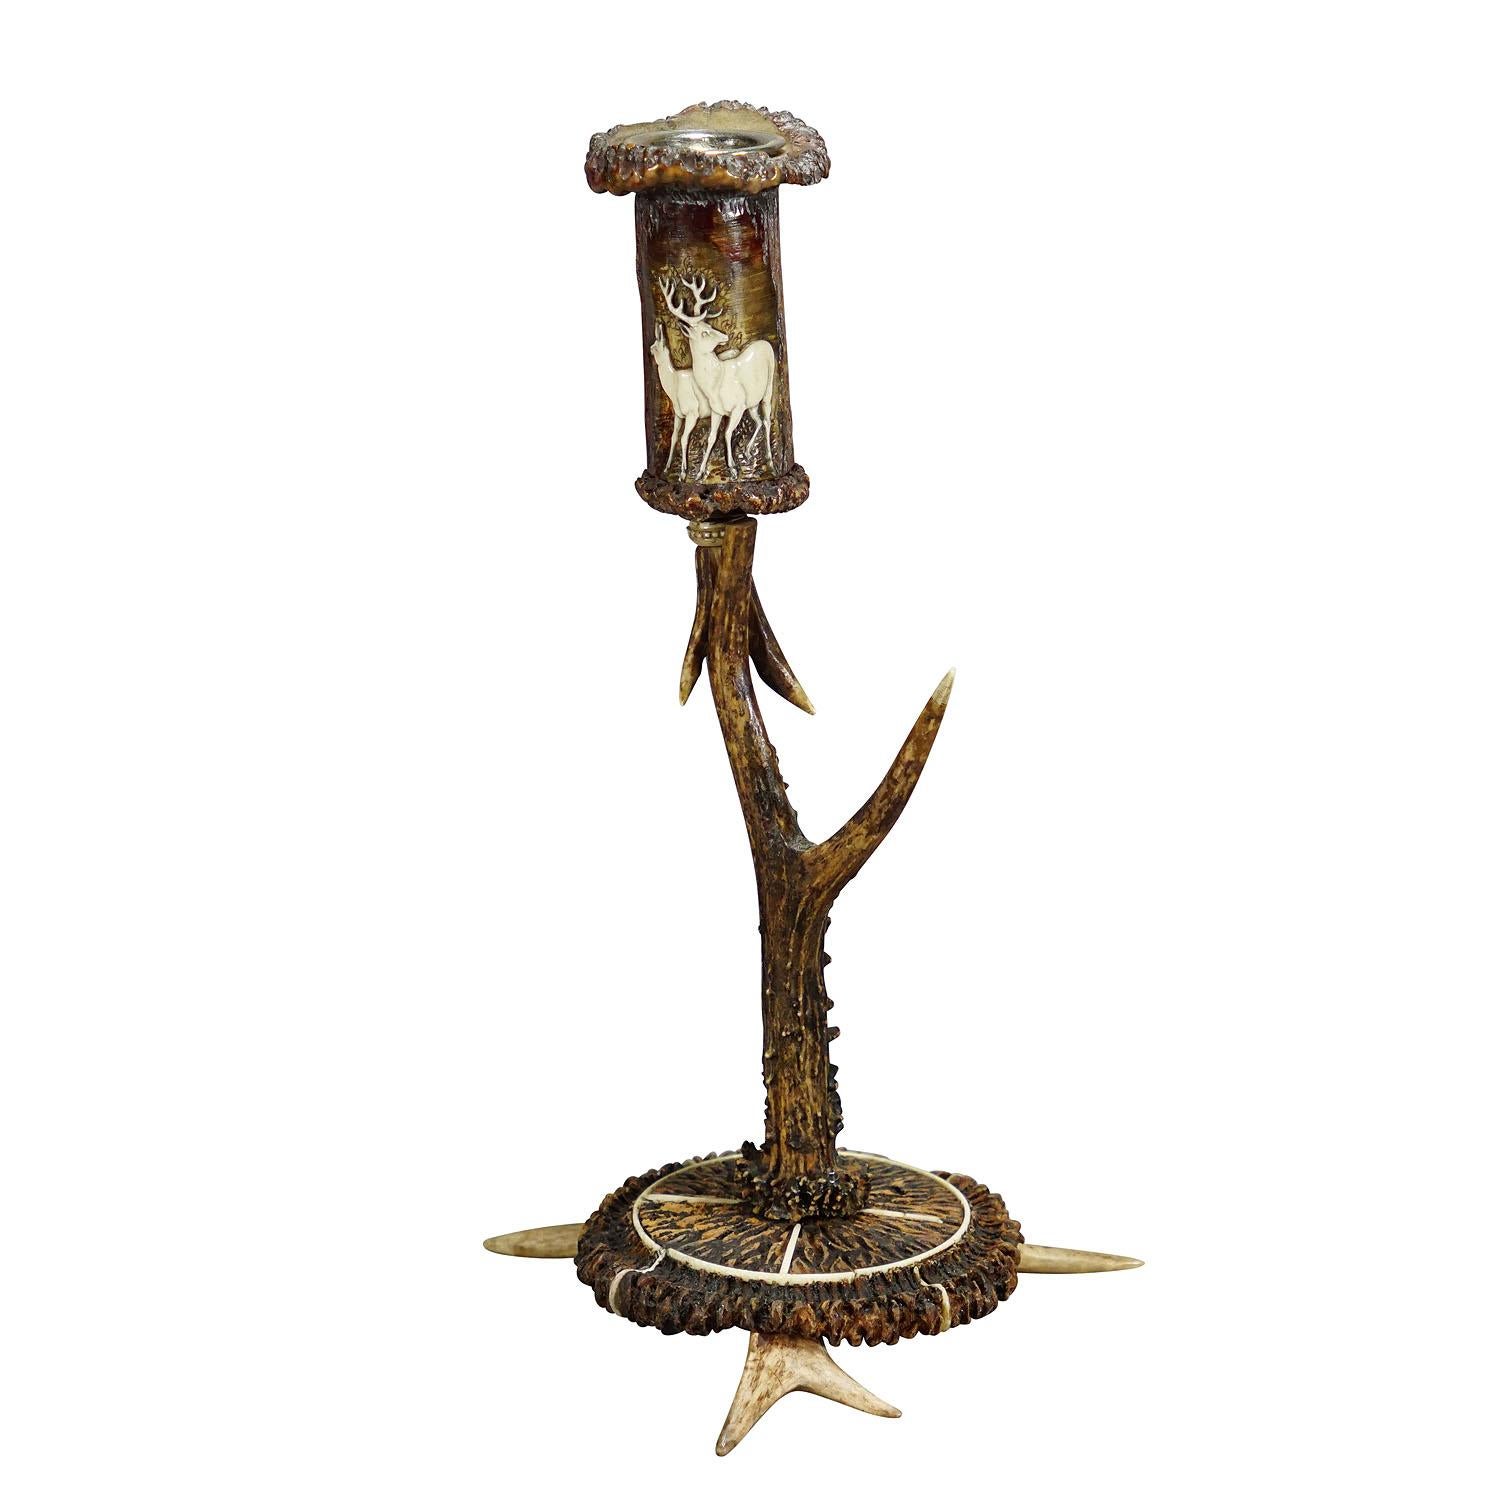 Stylish cabin decor antler candle holder with deer carving, Germany ca. 1900

A fashionable rustic candle holder, made of antlers from the deer. The spout is made of turned antler pieces and features an elaborate deer carving. Base decorated with